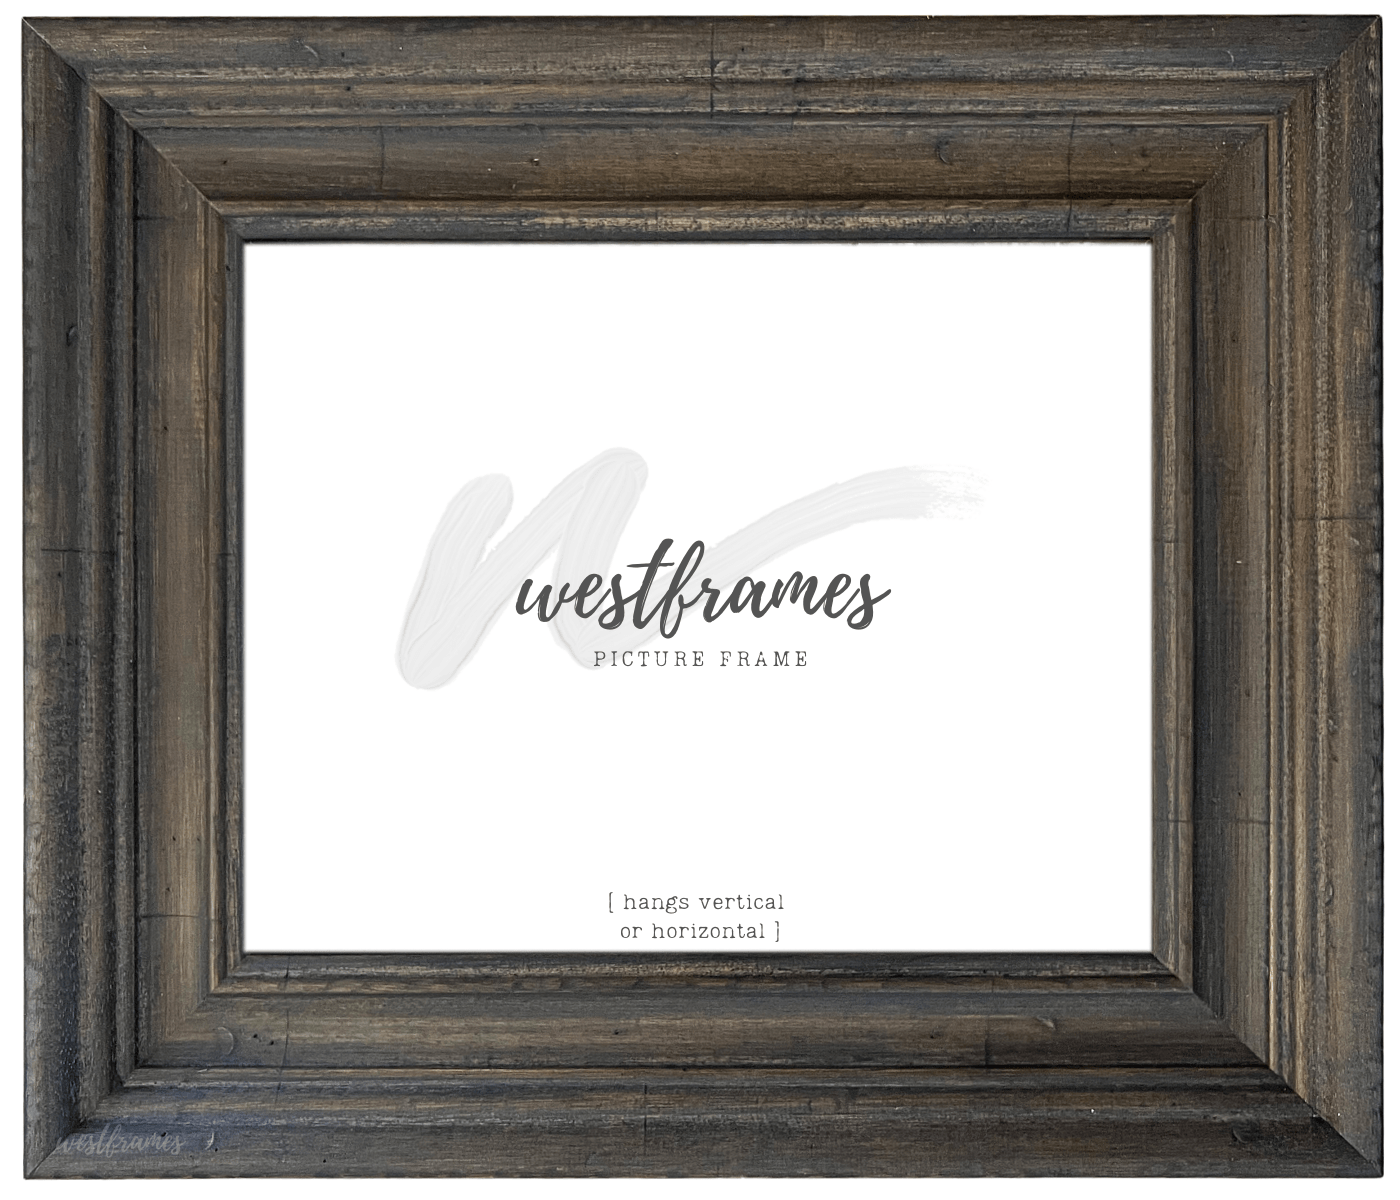 Farmhouse Distressed Rustic Picture Frame Natural Wood Gray Brown 2.25" Wide - West Frames